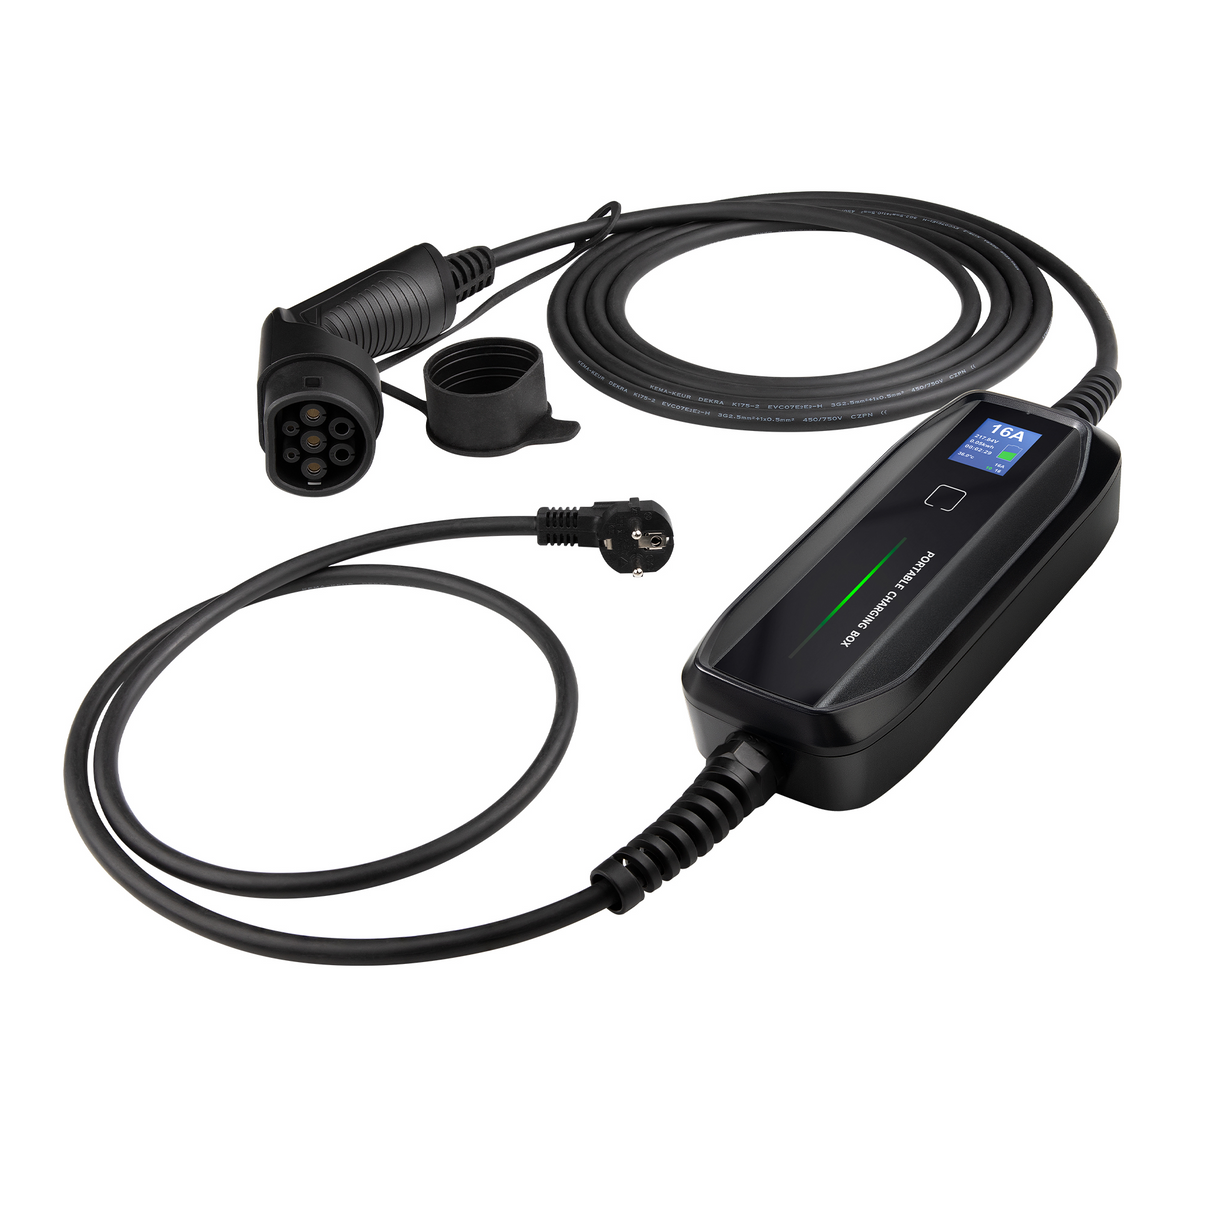 Mobile Charger Volkswagen e-Golf - Besen with LCD - Type 2 to Schuko